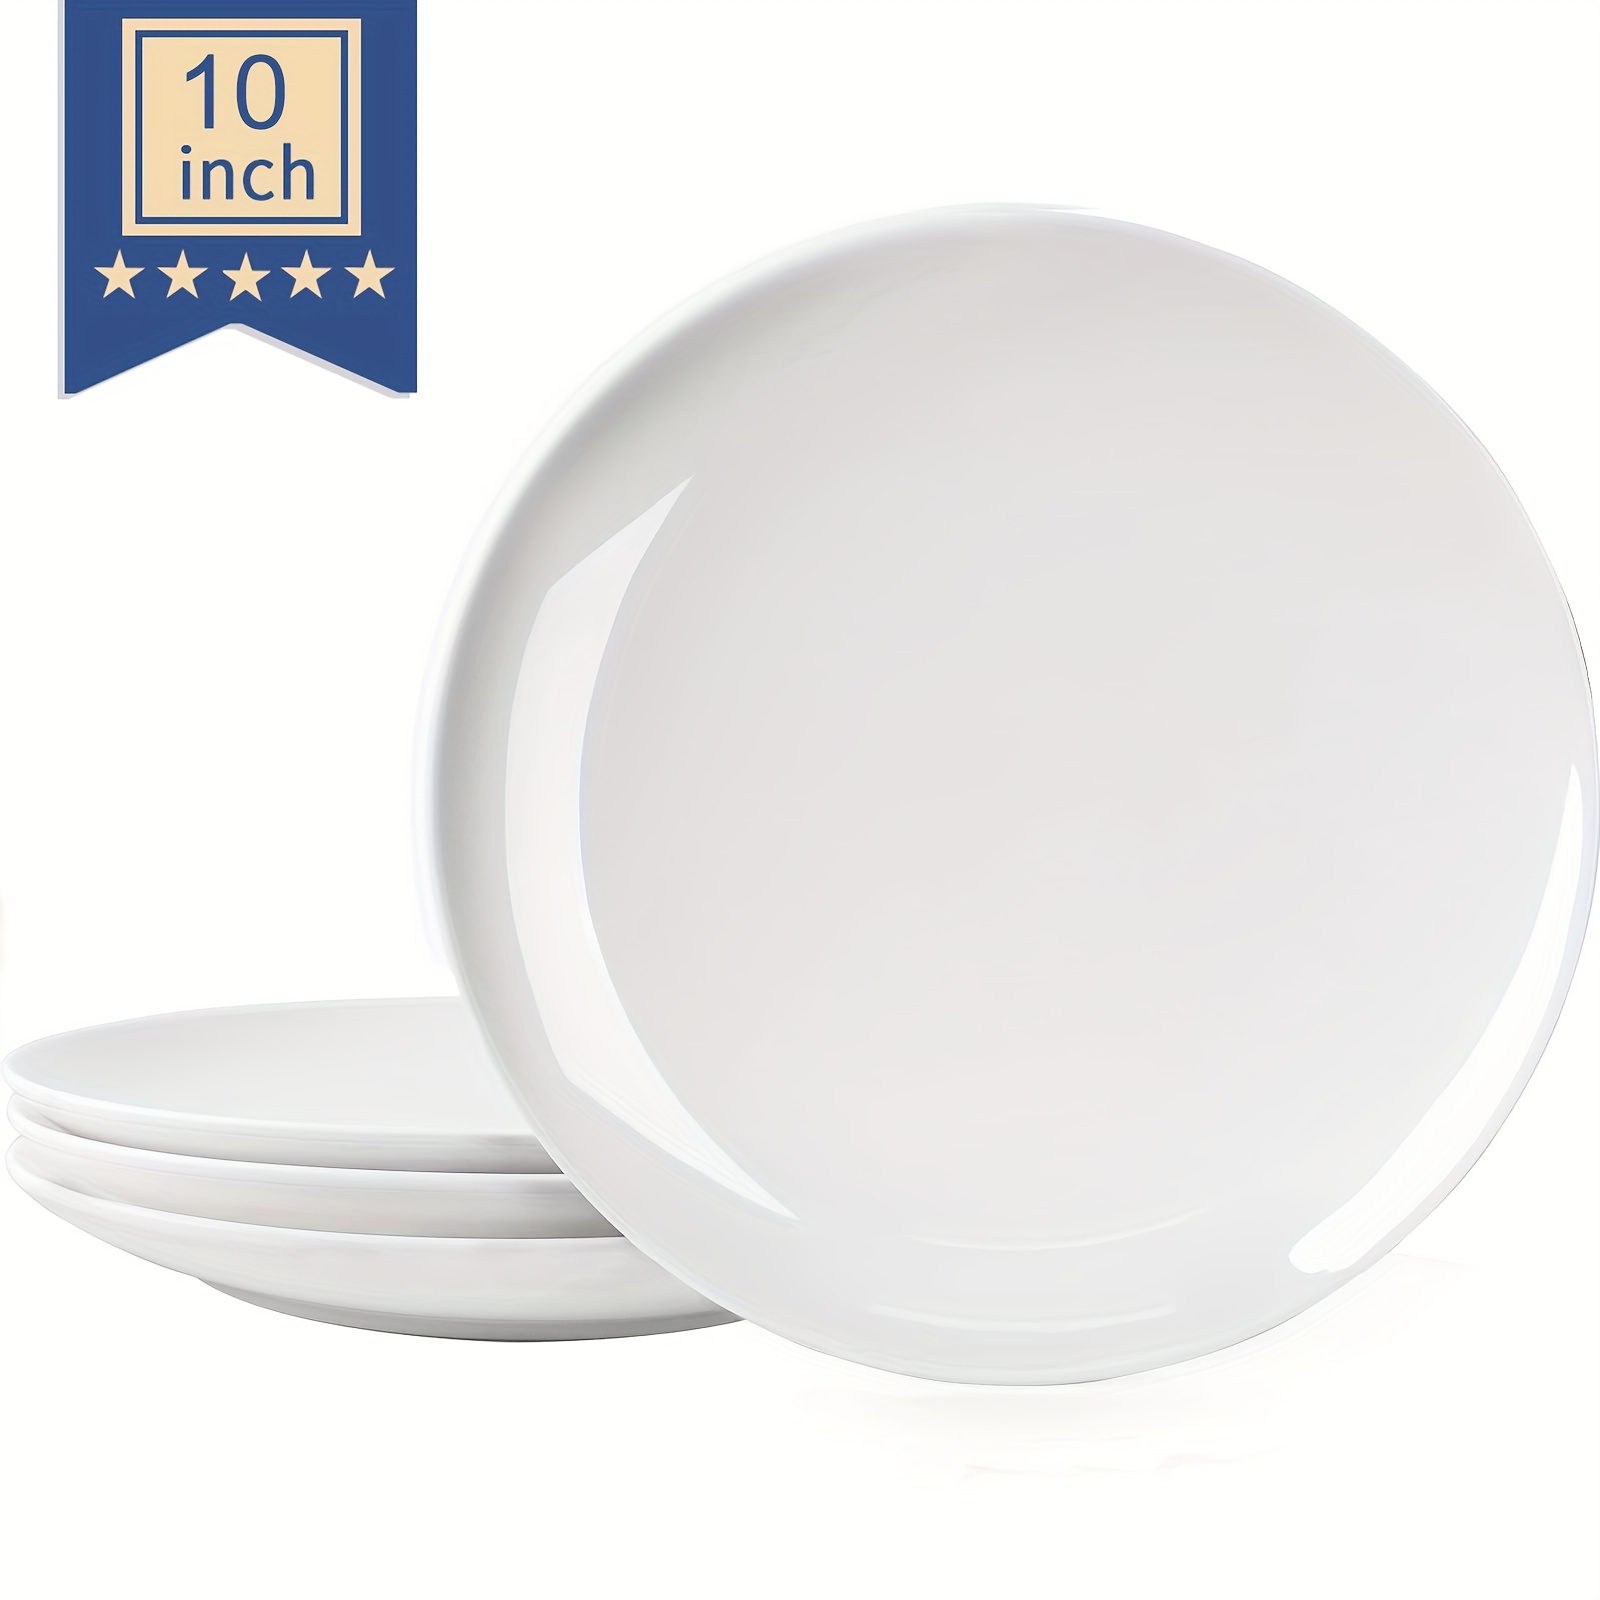 amhomel 12-Piece White Porcelain Dinner Plates, Round Dessert or Salad  Plate, Serving Dishes, Dinnerware Sets, Scratch Resistant, Lead-Free